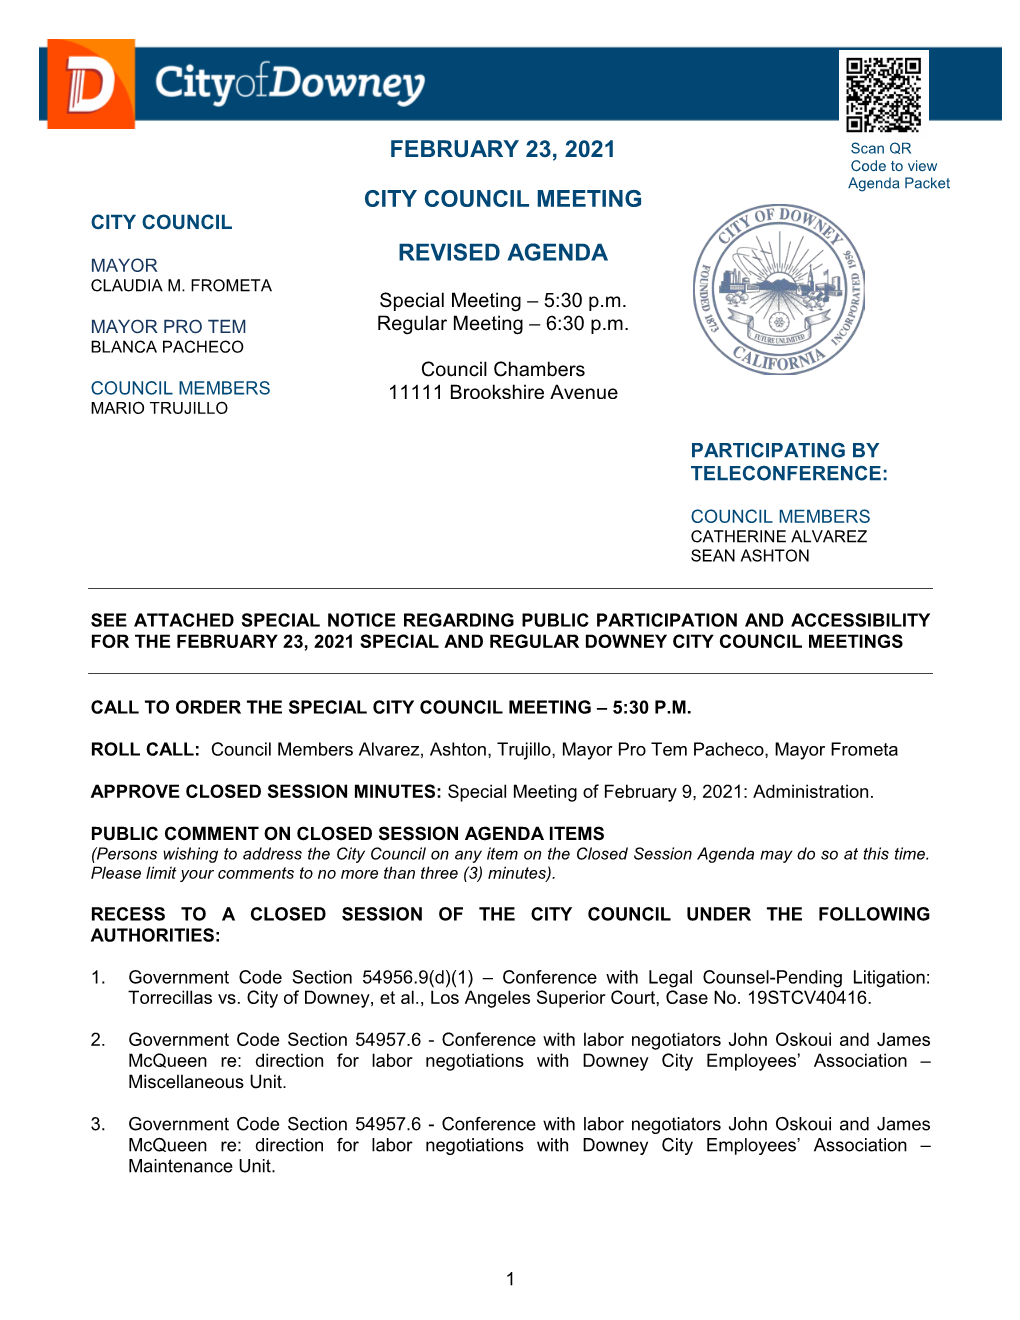 February 23, 2021 City Council Meeting Revised Agenda